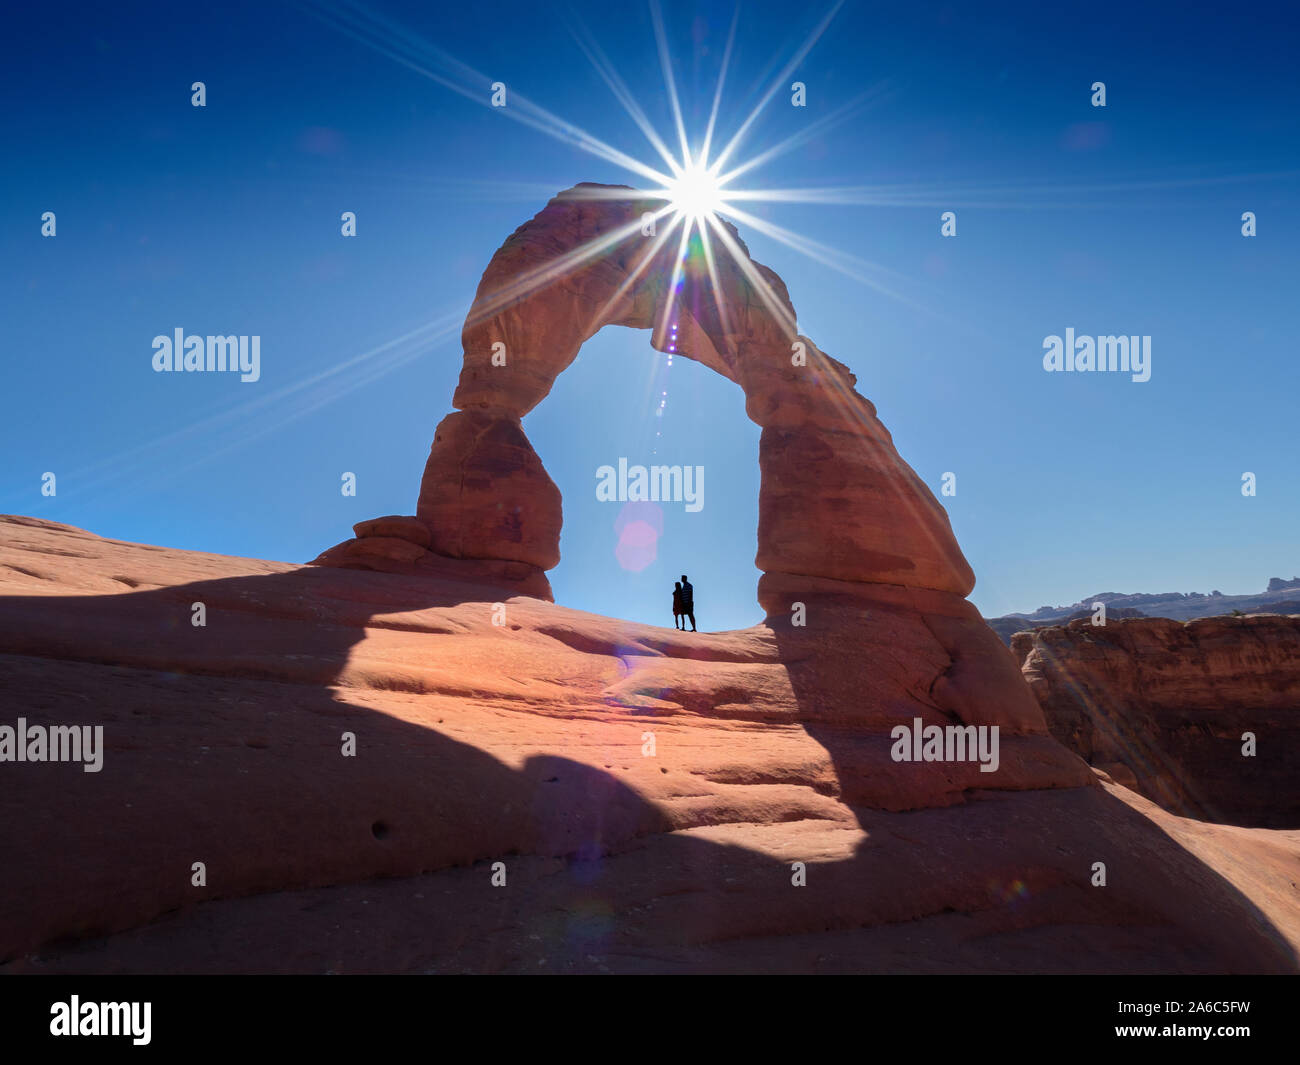 The Delicate Arch in Arches National Park, Moab, Utah, USA. Natural sandstone arch with sun above it. Stock Photo